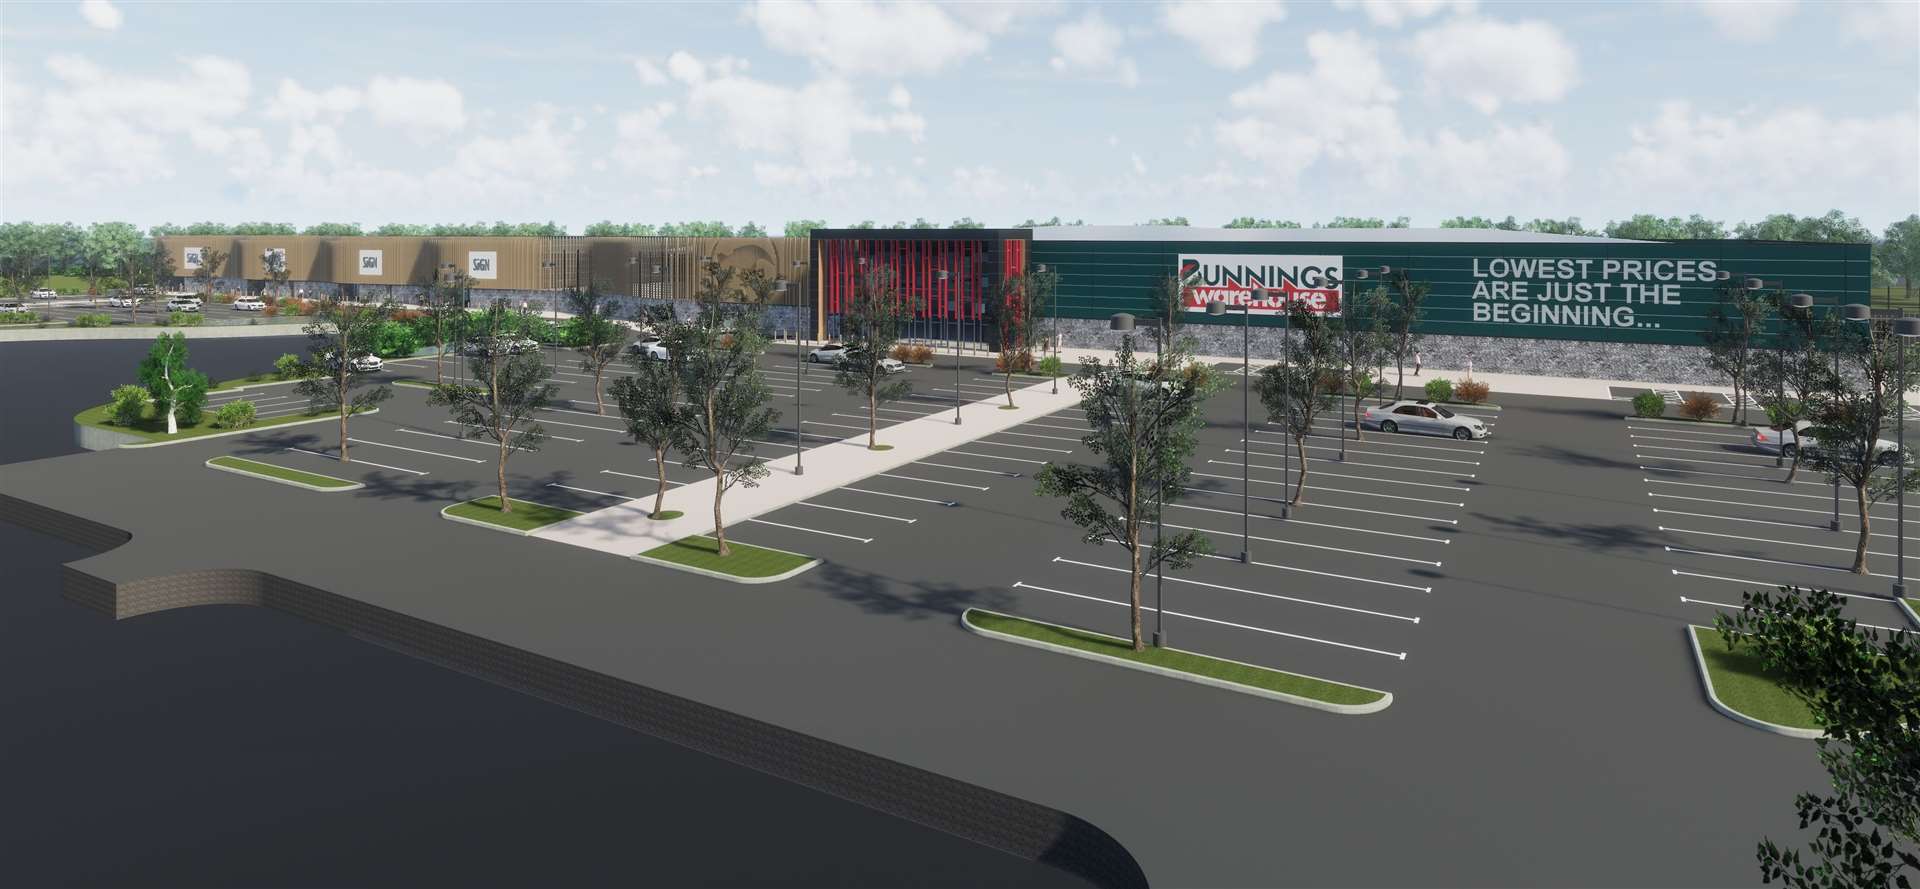 A huge Bunnings store was part of the original plan